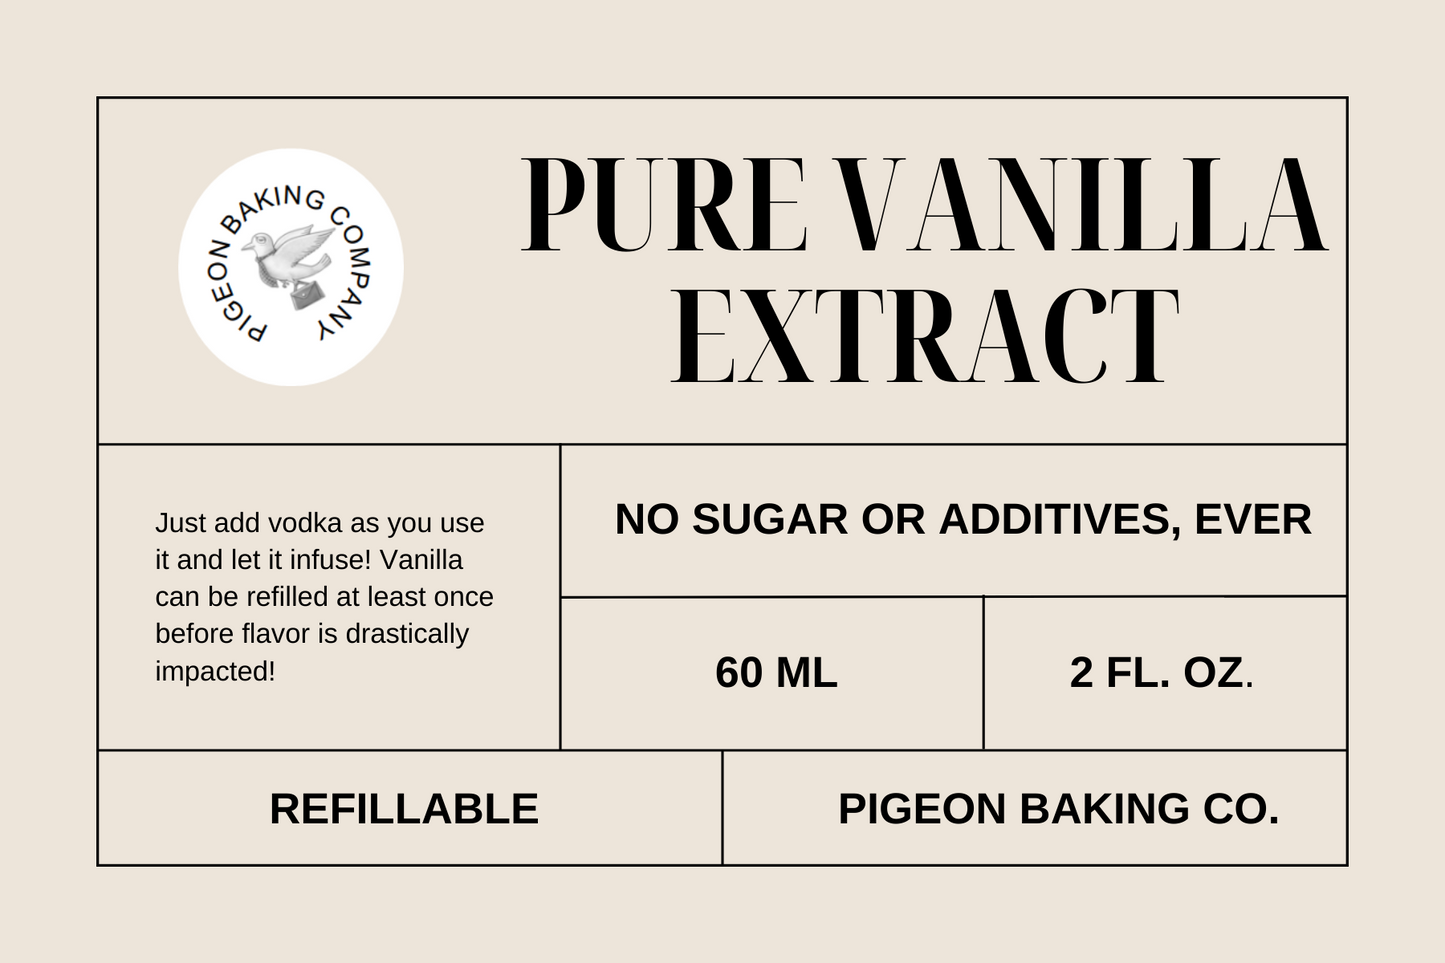 [WITH BEANS] Pure All-Natural MEXICAN Single-Origin Vanilla Extract